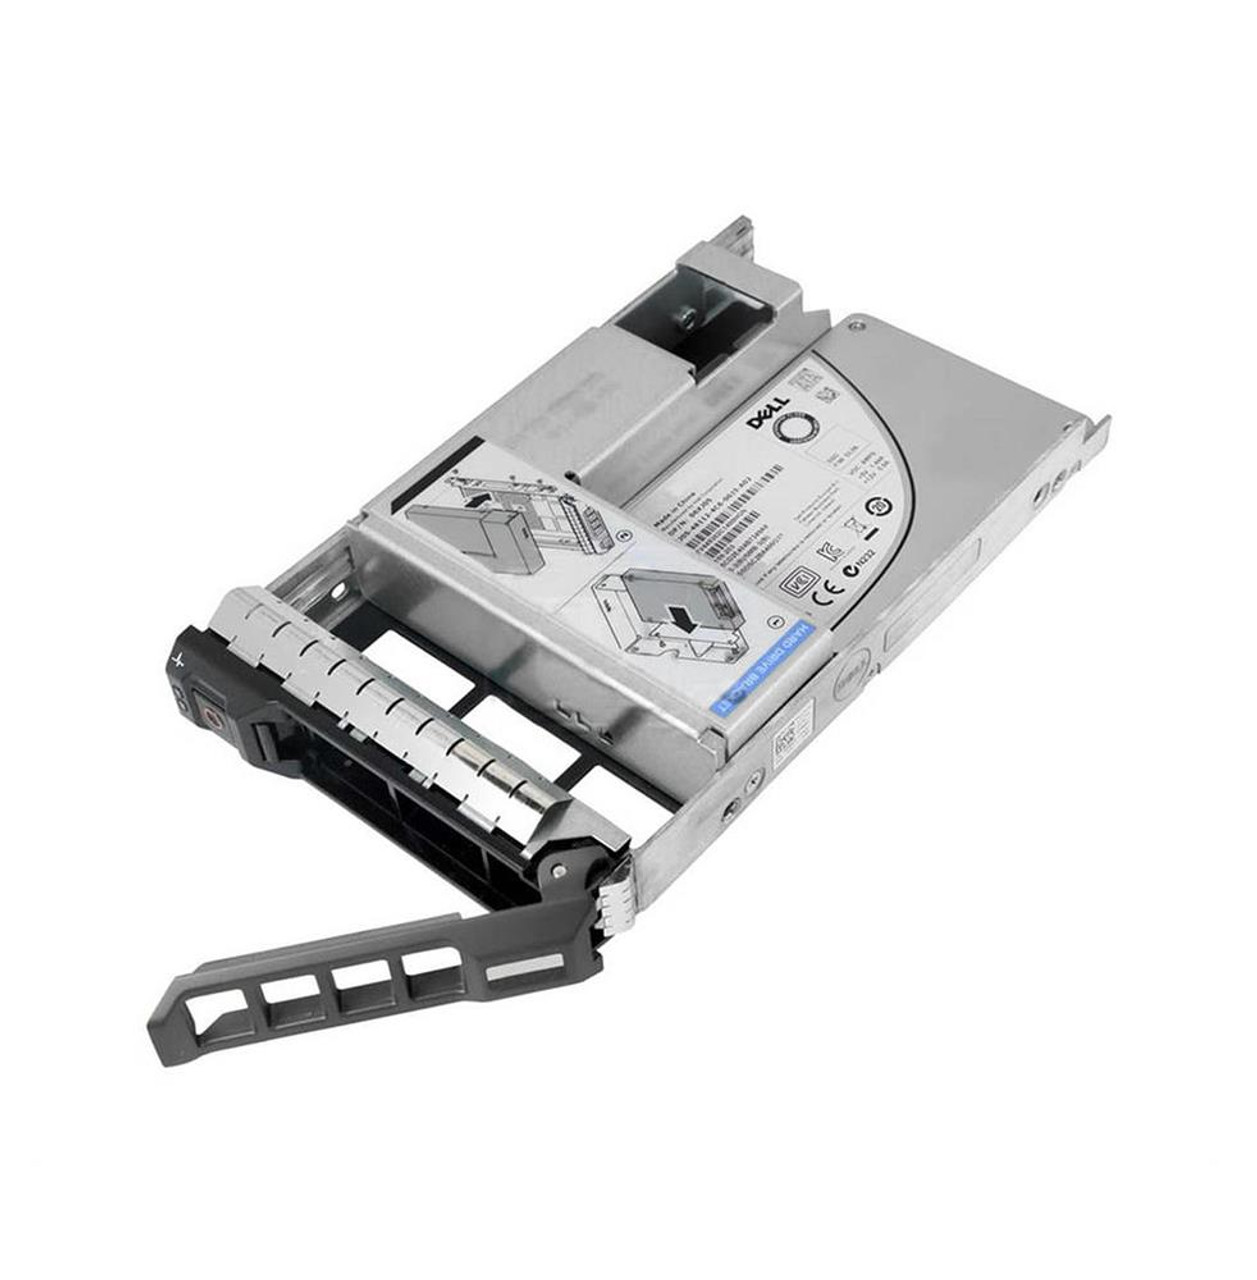 401-ABBR Dell 3.84TB MLC SAS 12Gbps Read Intensive 2.5-inch Internal Solid State Drive (SSD) with 3.5-inch Hybrid Carrier